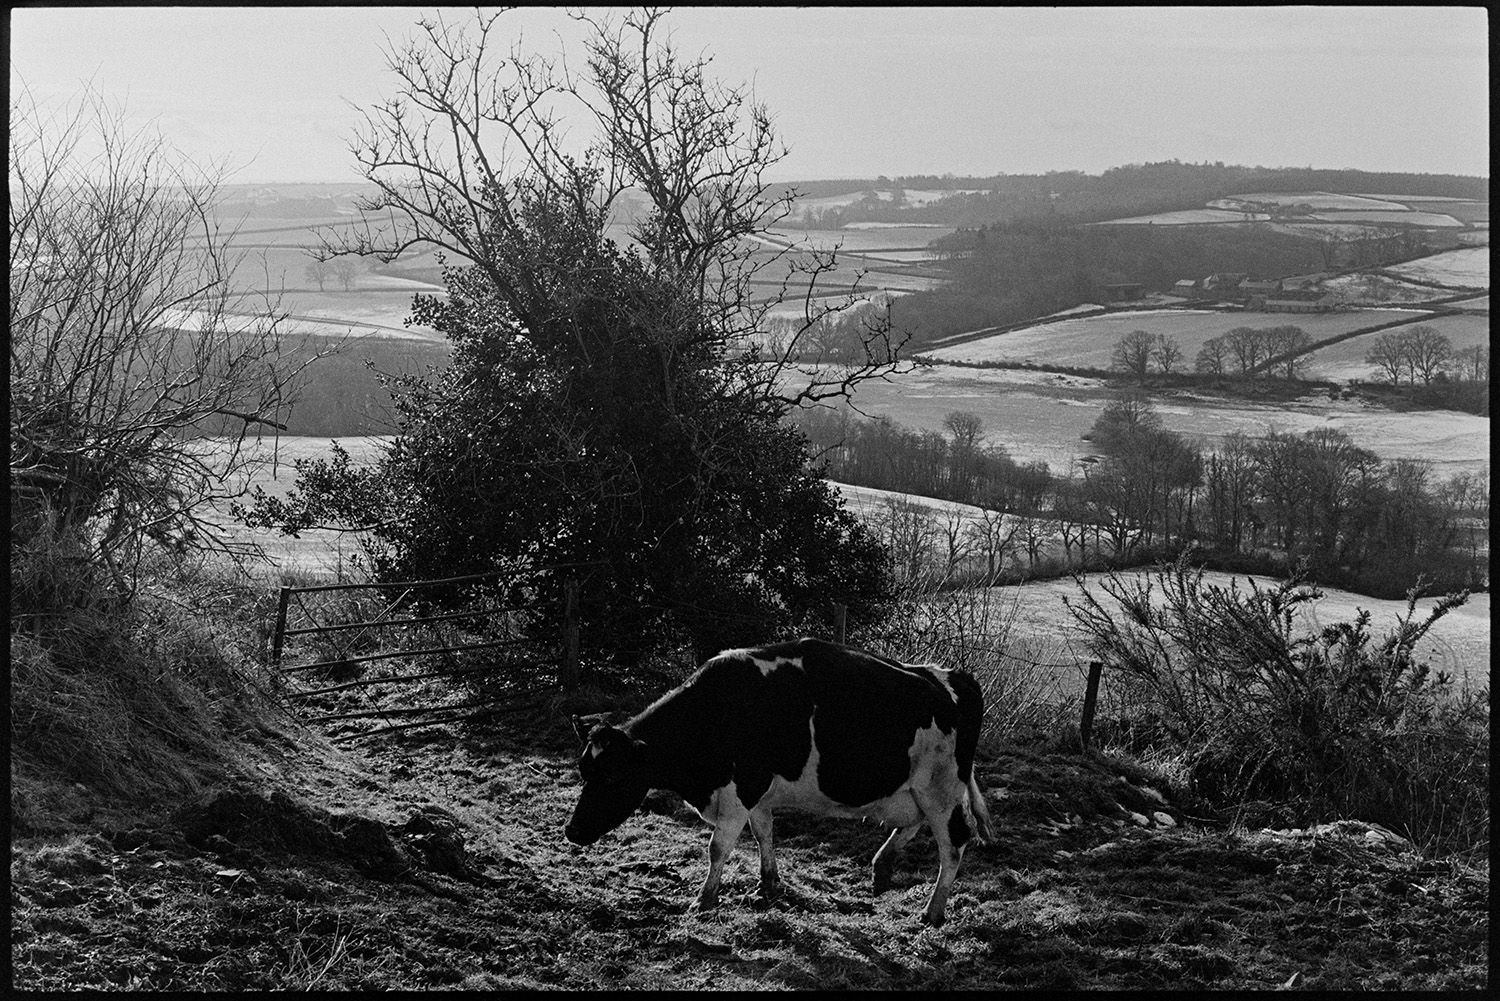 A pregnant cow by a field gate at Harepath, Beaford. A landscape with fields and trees can be seen in the background. Some of the fields have patches of snow.]